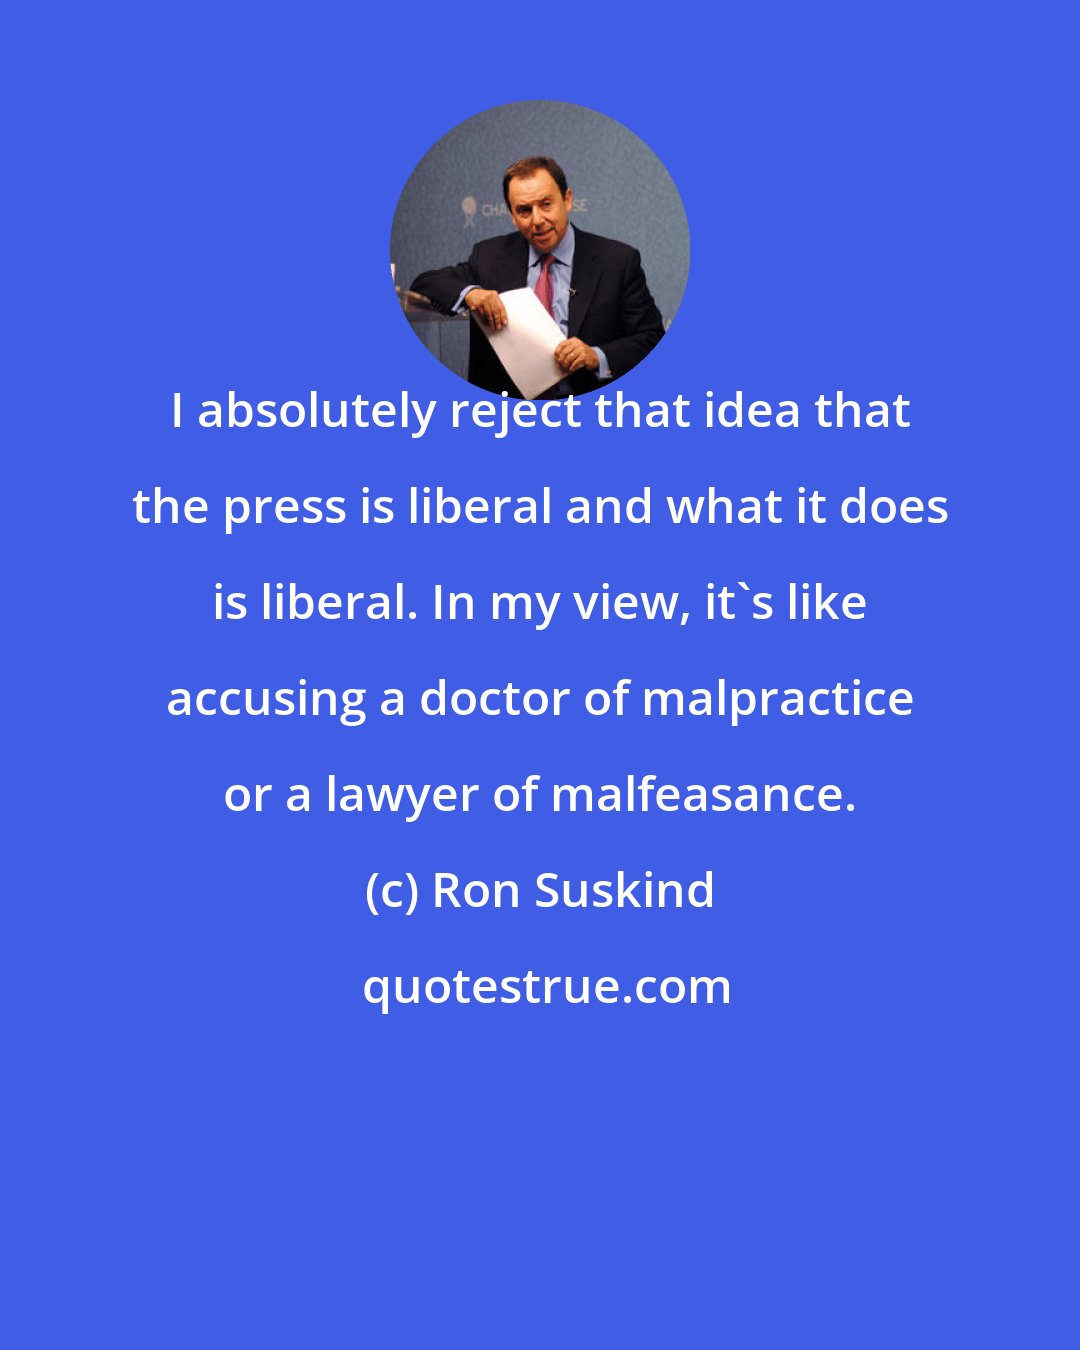 Ron Suskind: I absolutely reject that idea that the press is liberal and what it does is liberal. In my view, it's like accusing a doctor of malpractice or a lawyer of malfeasance.